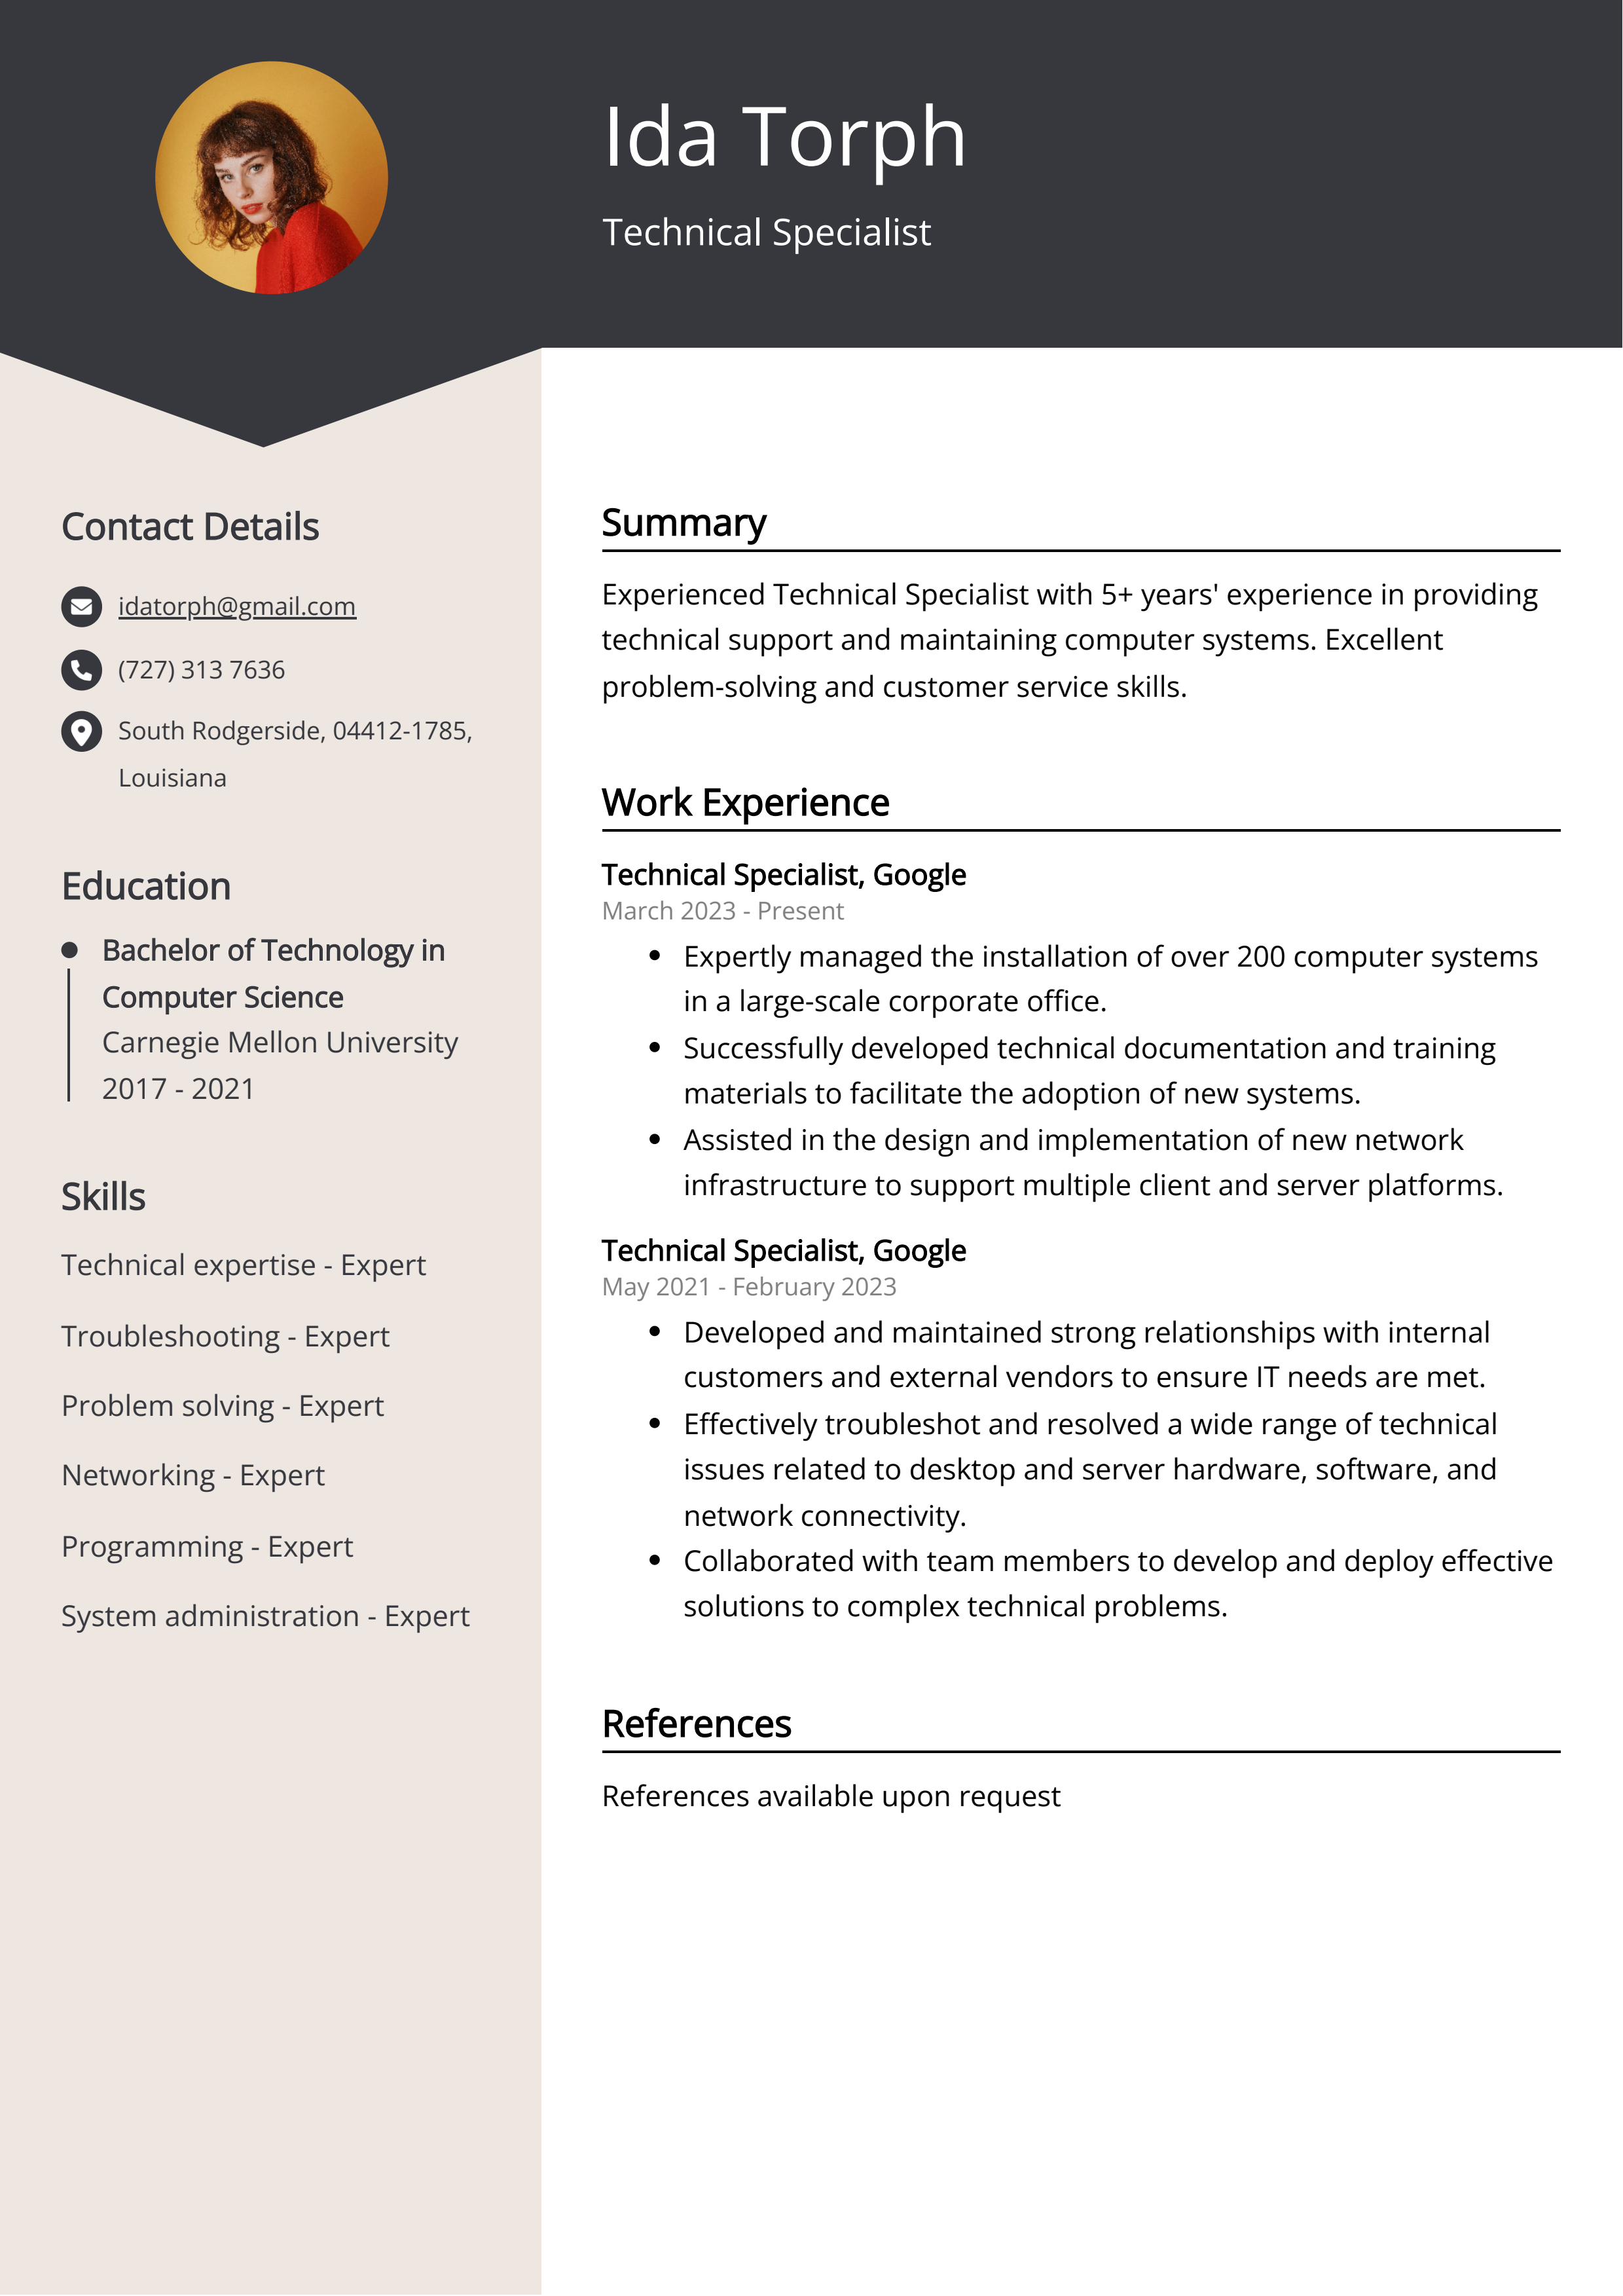 Technical Specialist CV Example